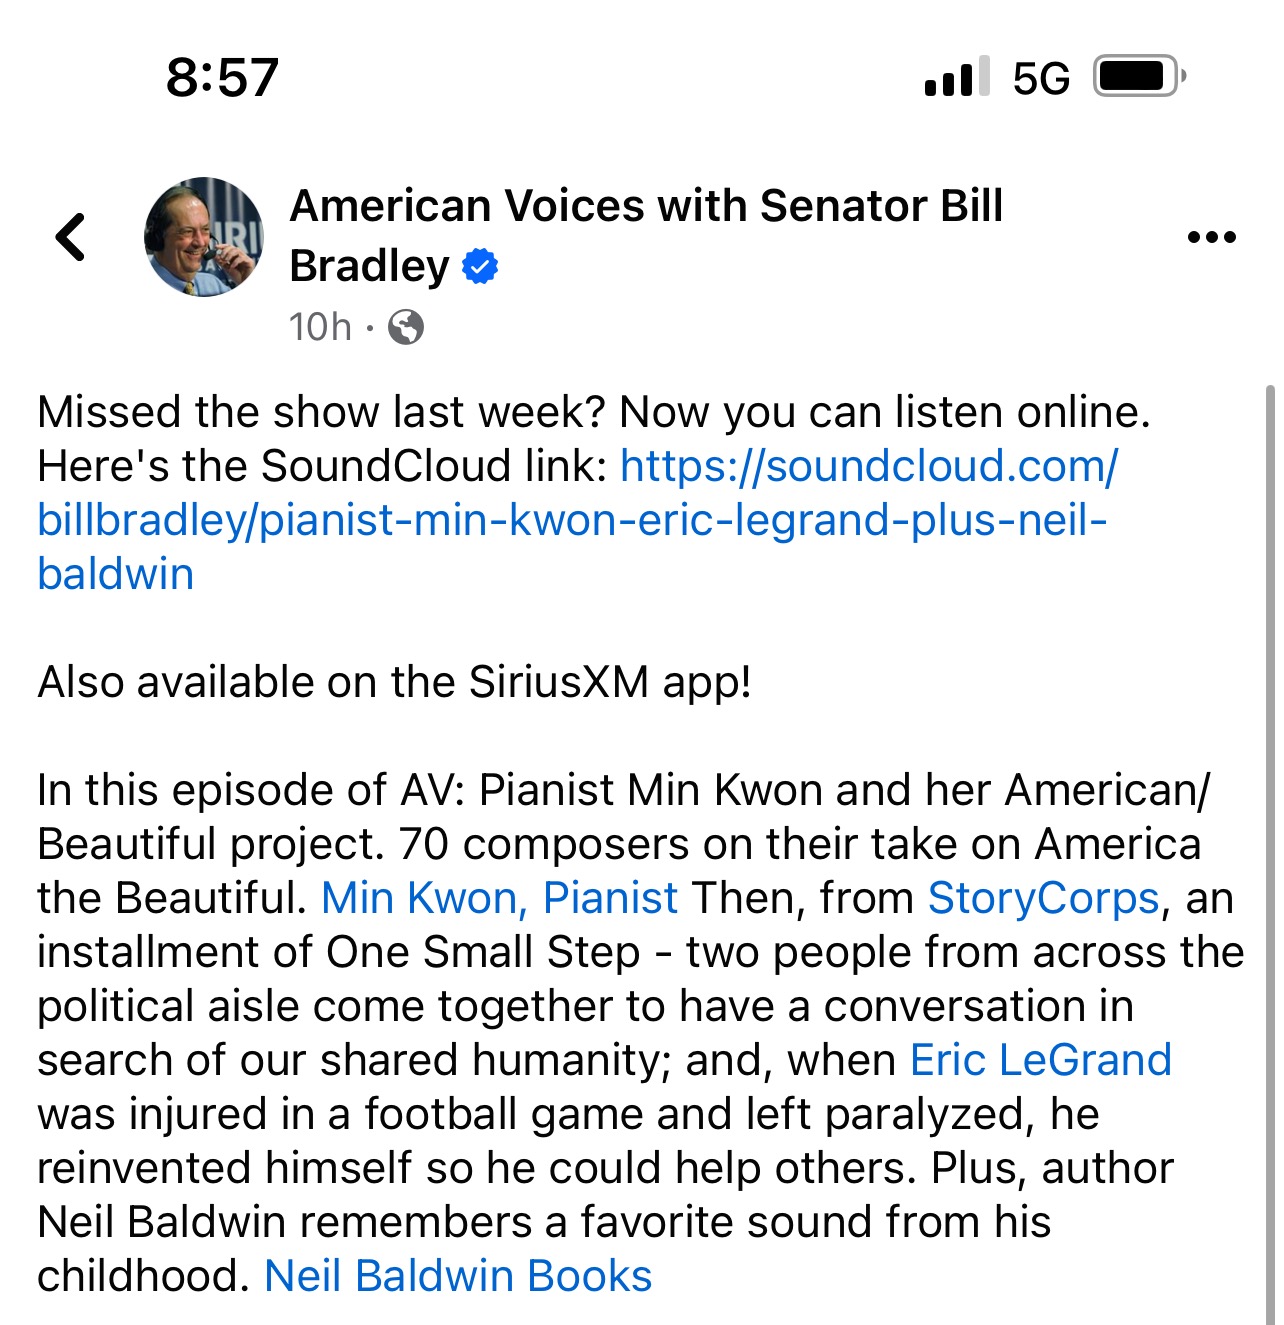 Thanks to Sen. Bill Bradley and producer Devorah Klahr for re-posting my childhood memory on their AMERICAN VOICES podcast